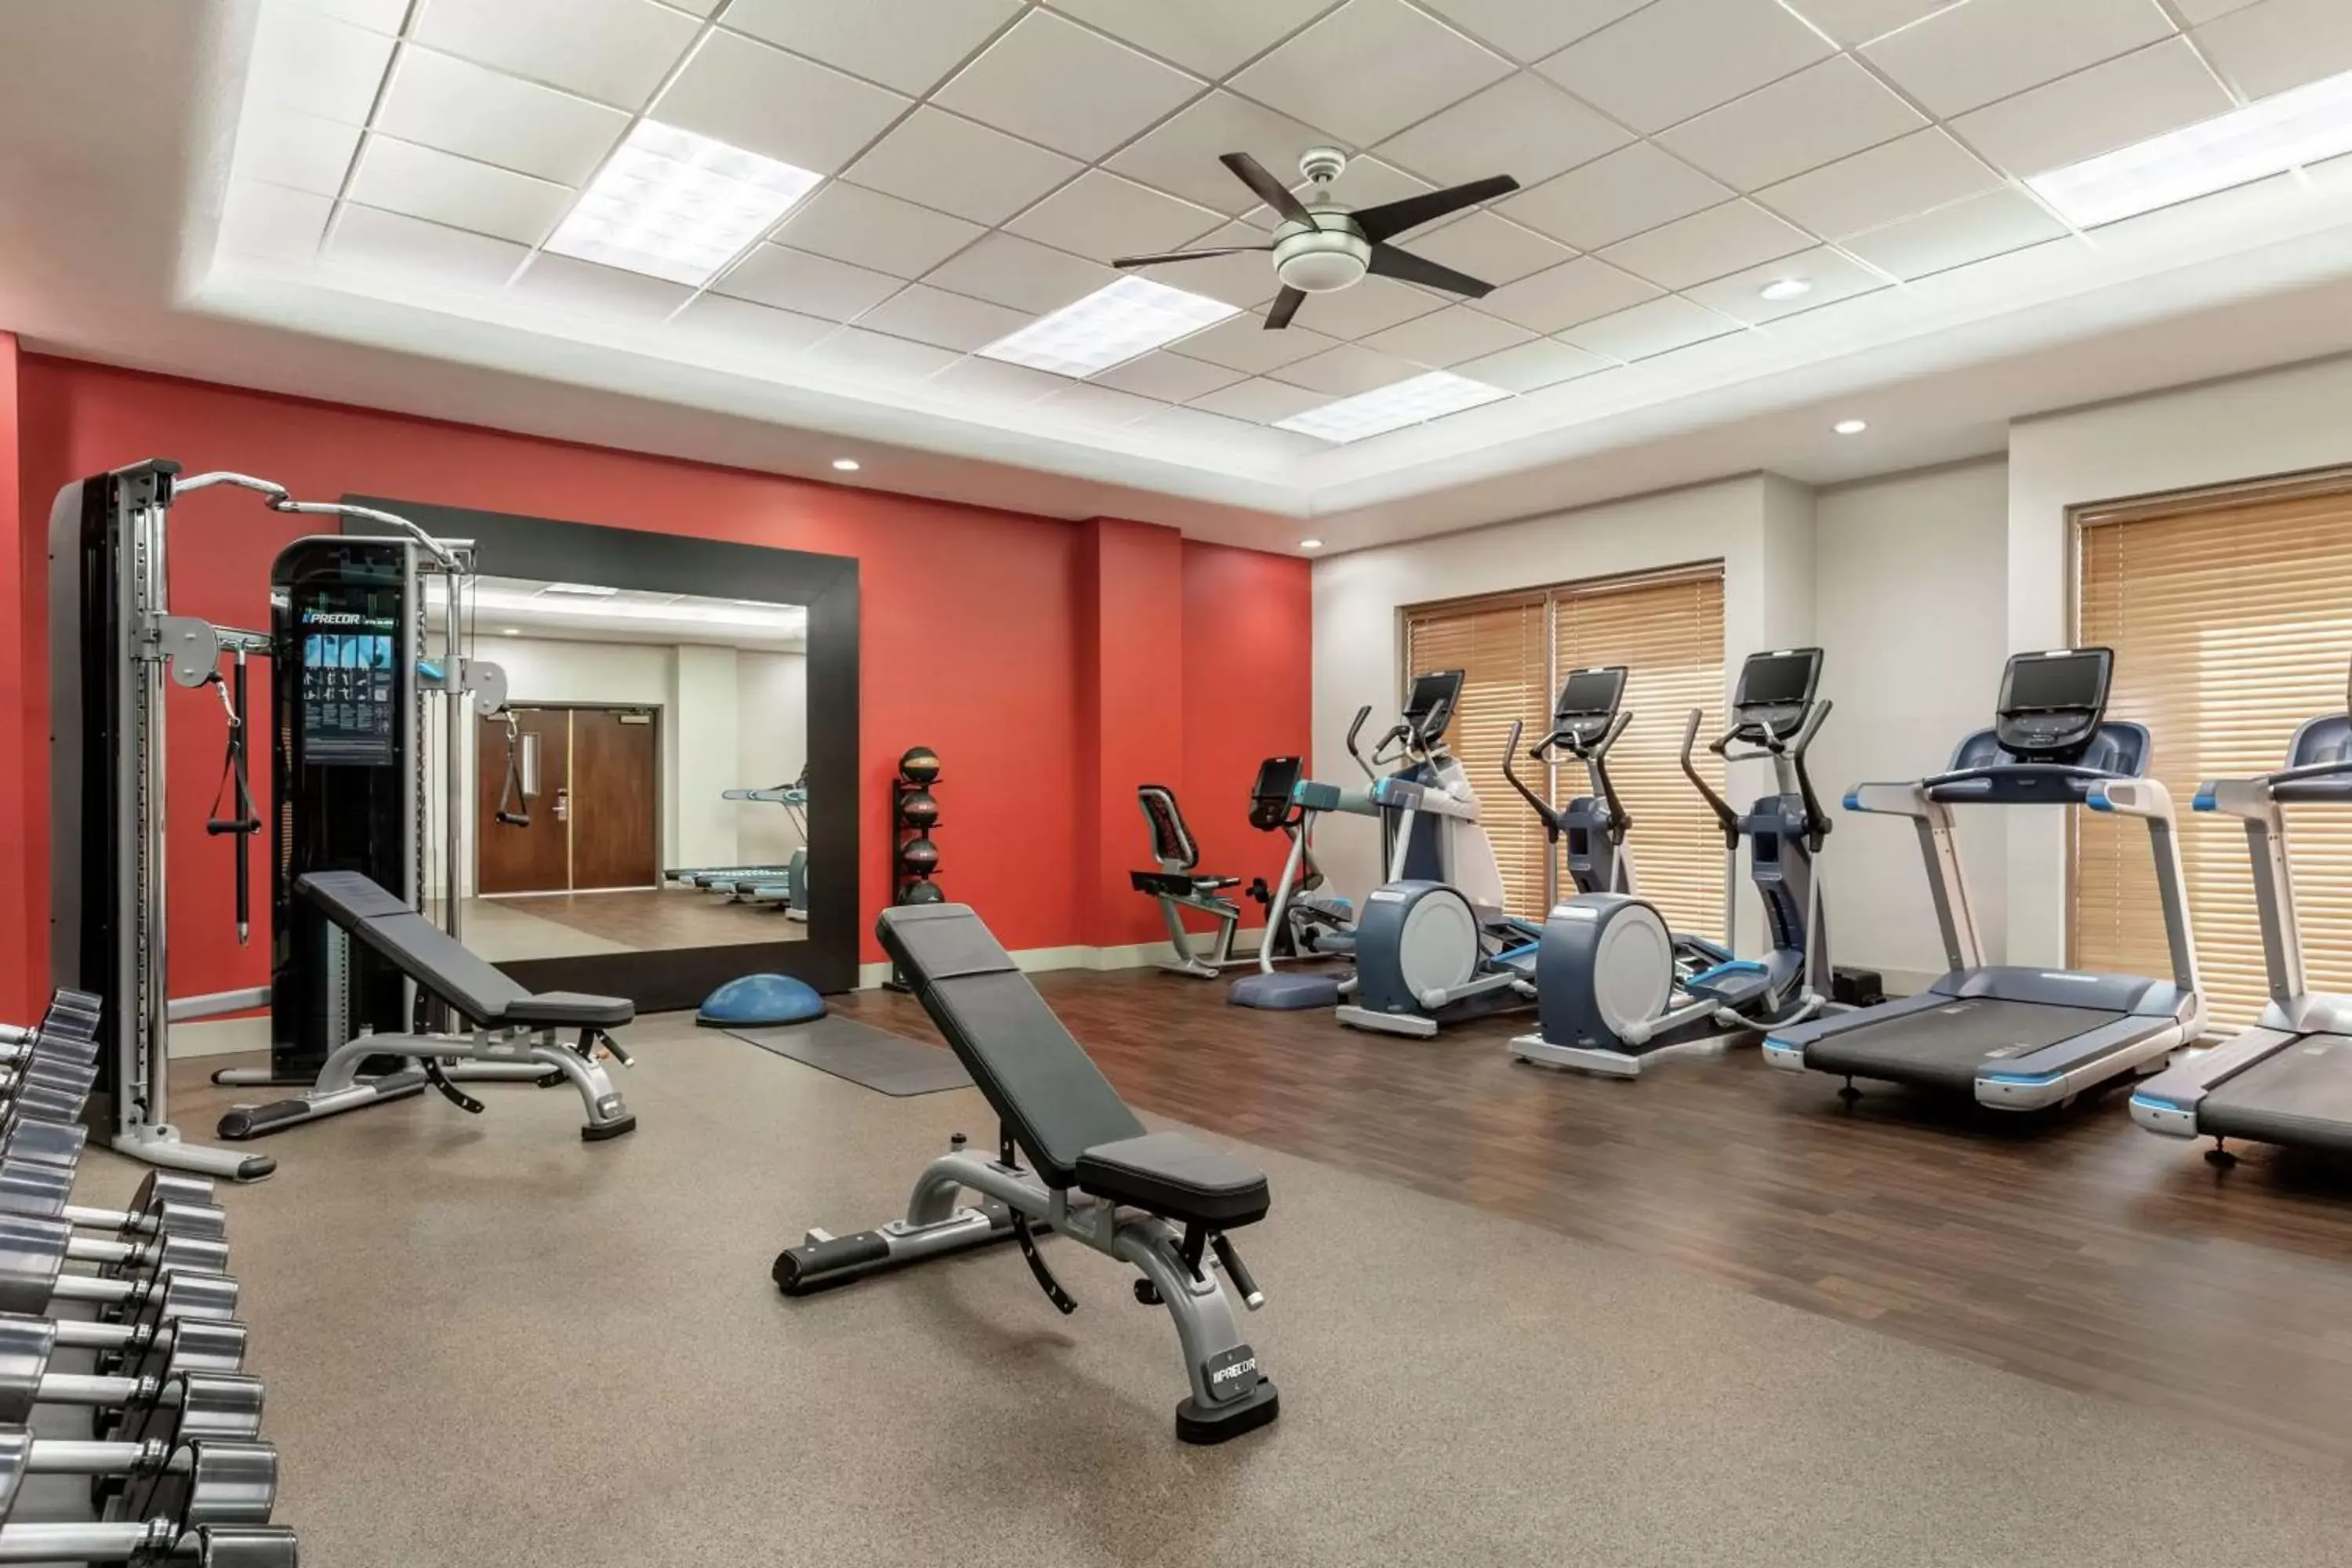 Fitness centre/facilities, Fitness Center/Facilities in Embassy Suites by Hilton Convention Center Las Vegas